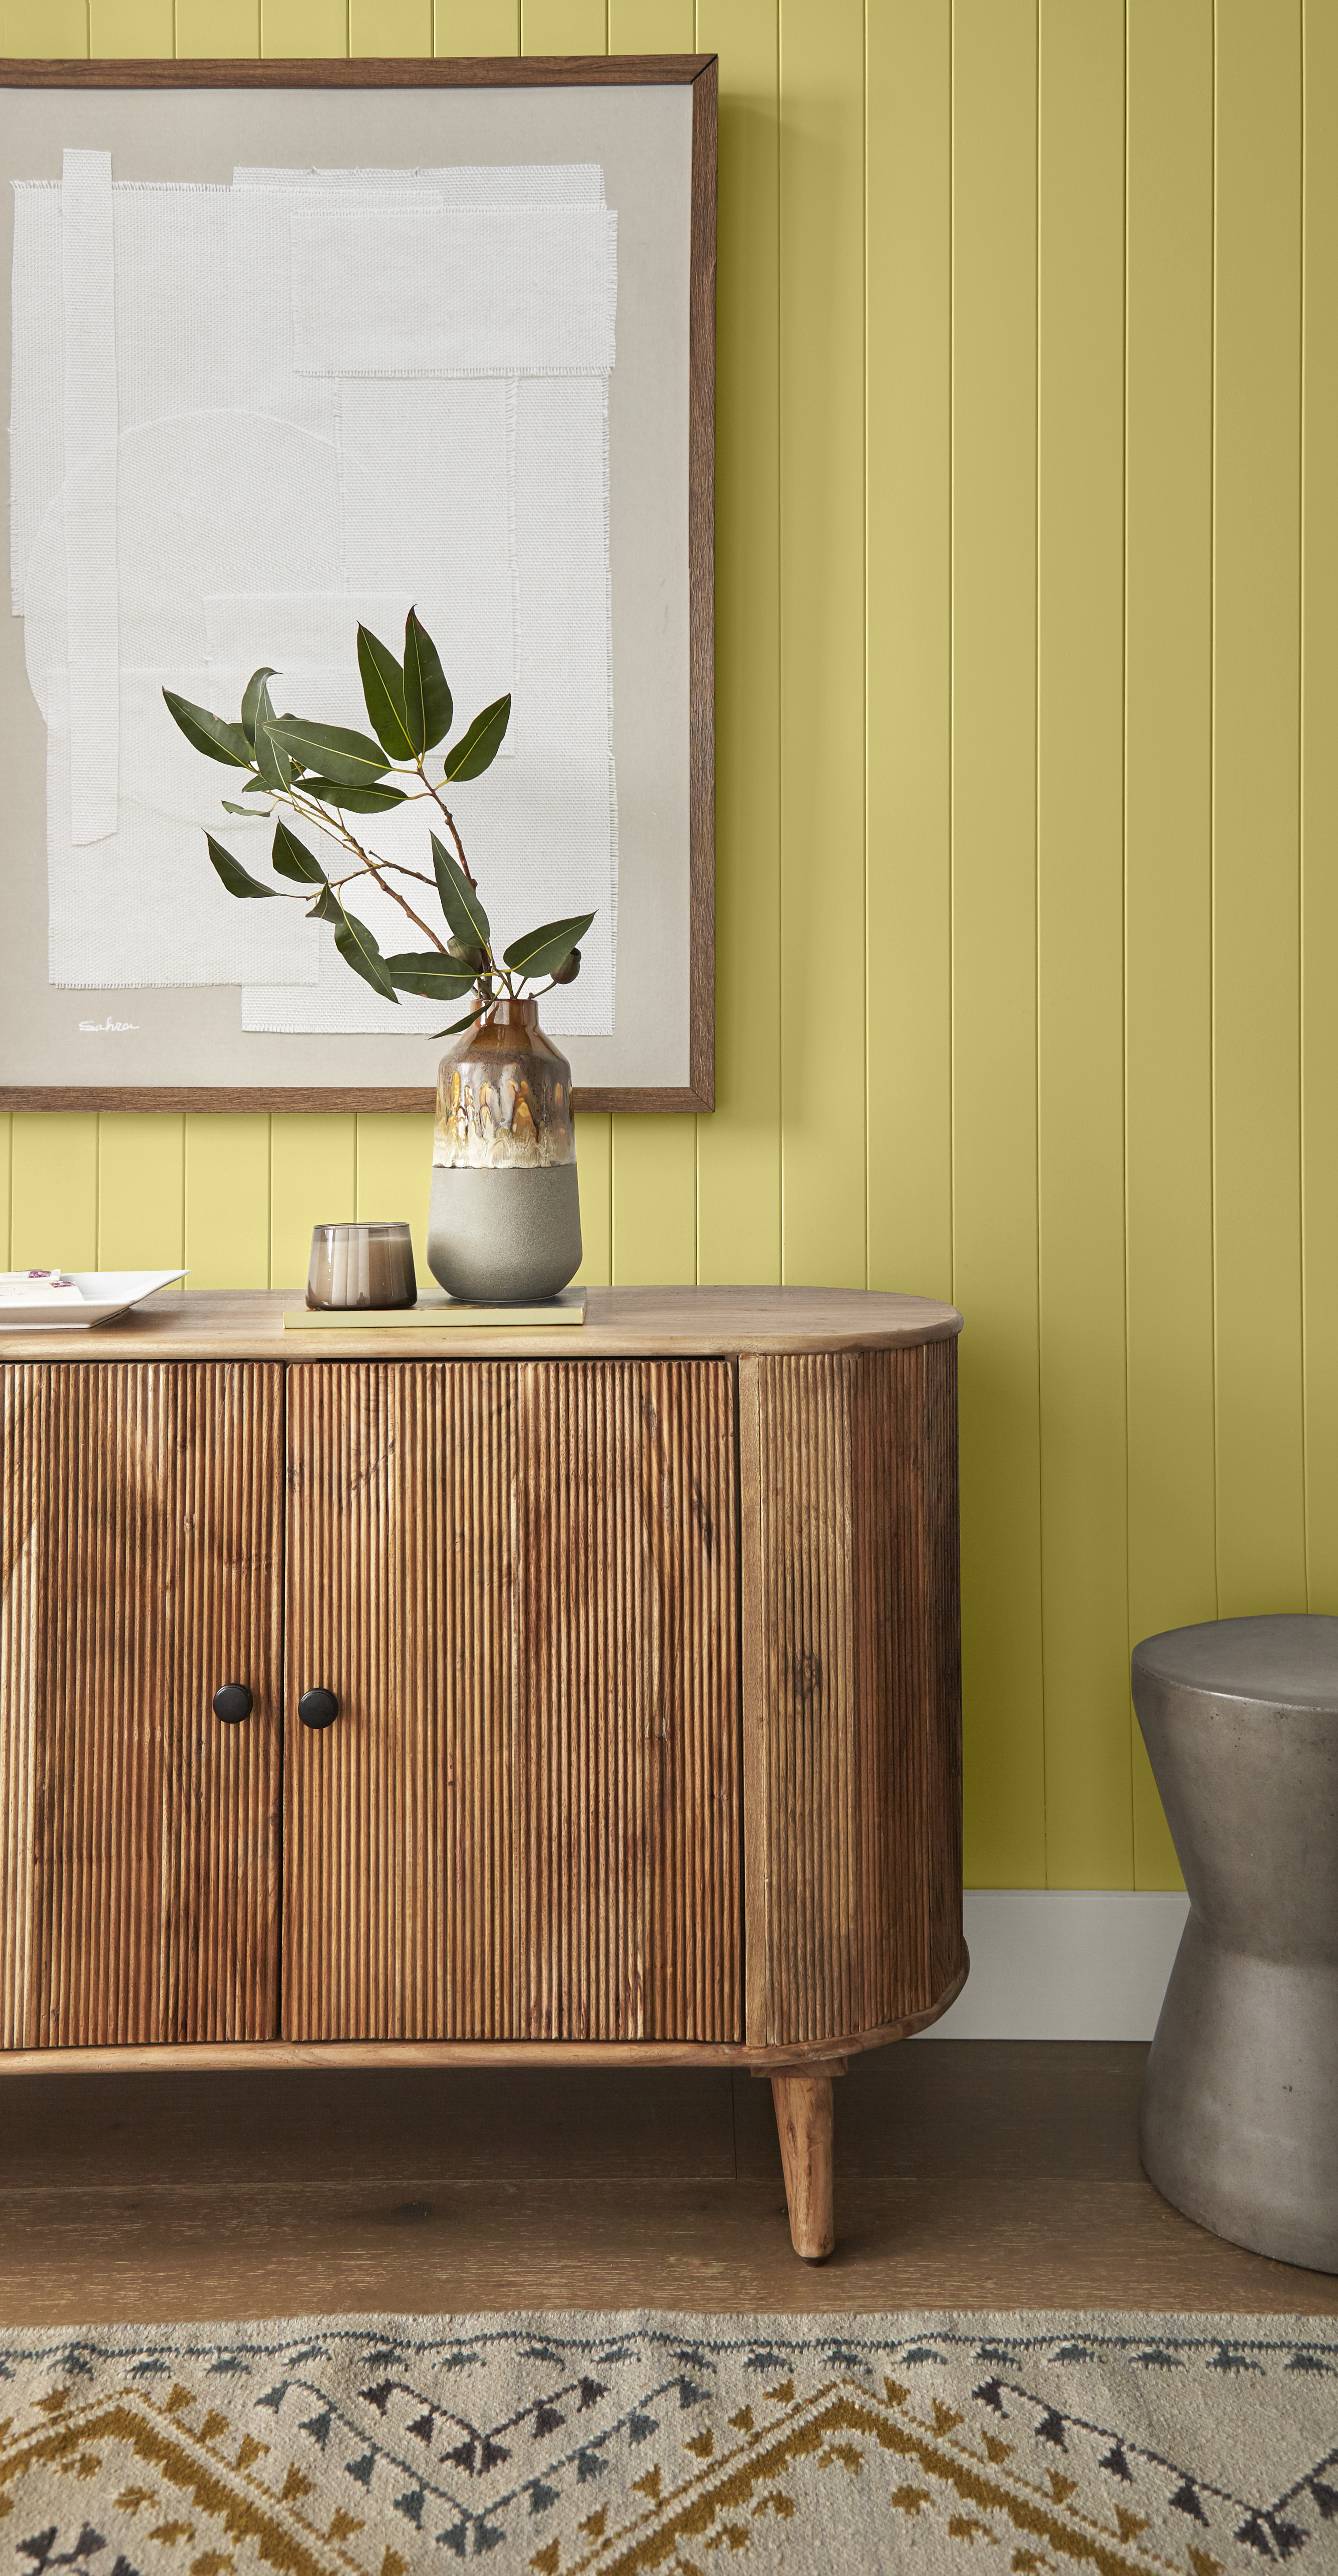 A closeup of a wood console, with the paneled walls behind it painted in a greenish-yellow colour